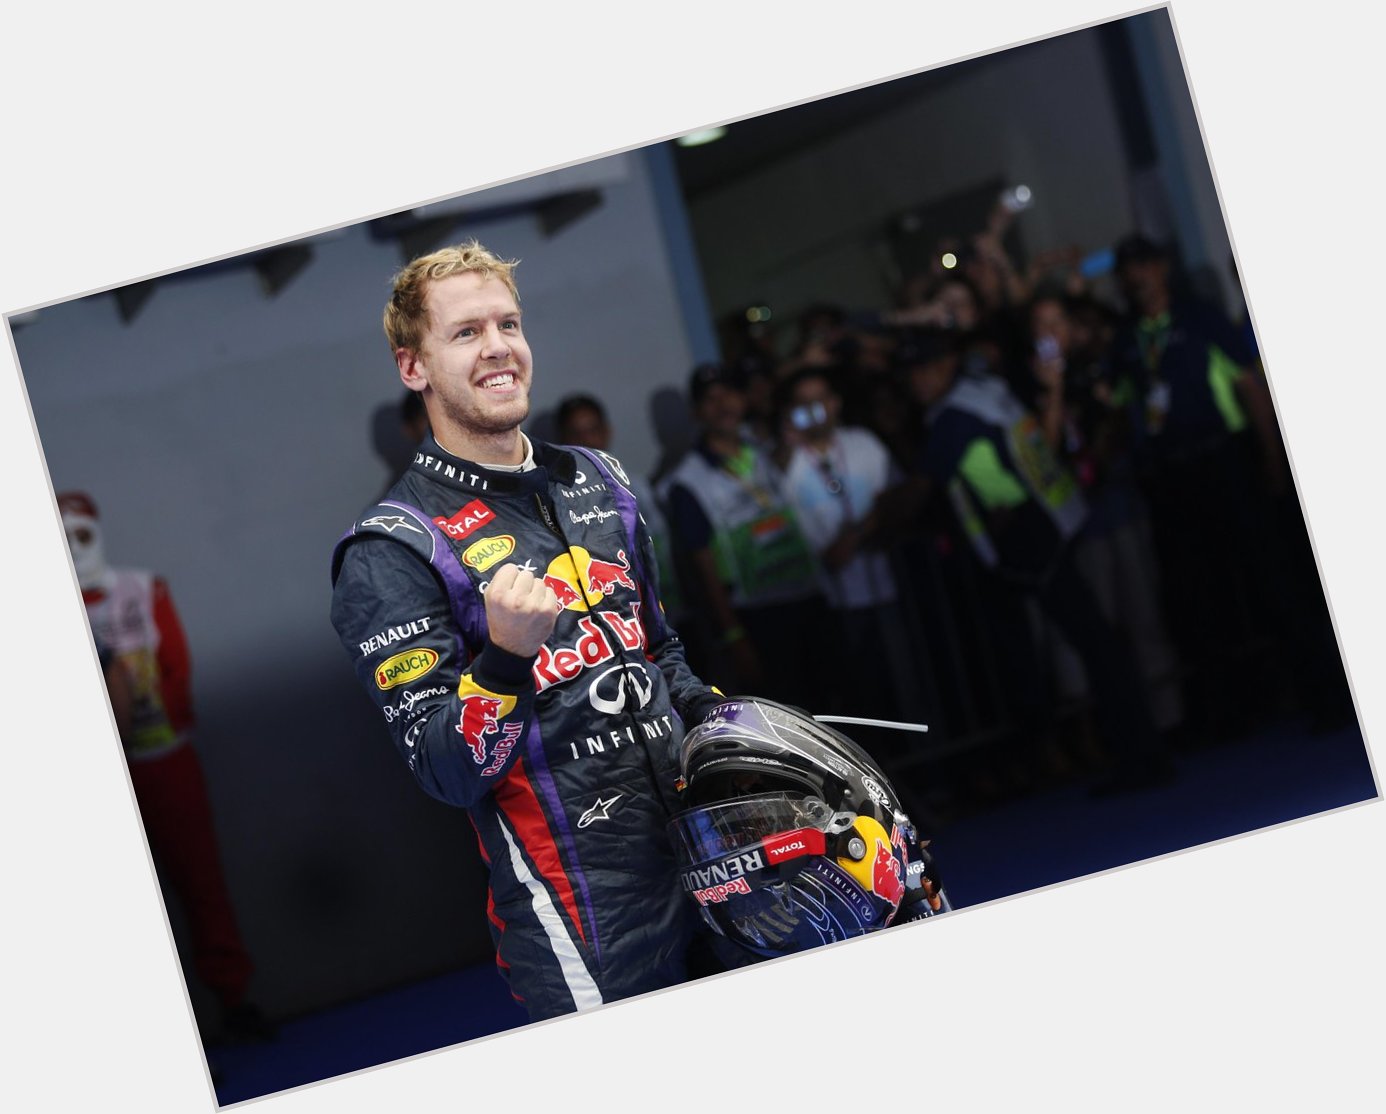 We would like to wish a happy 28th birthday to superstar Sebastian Vettel! 